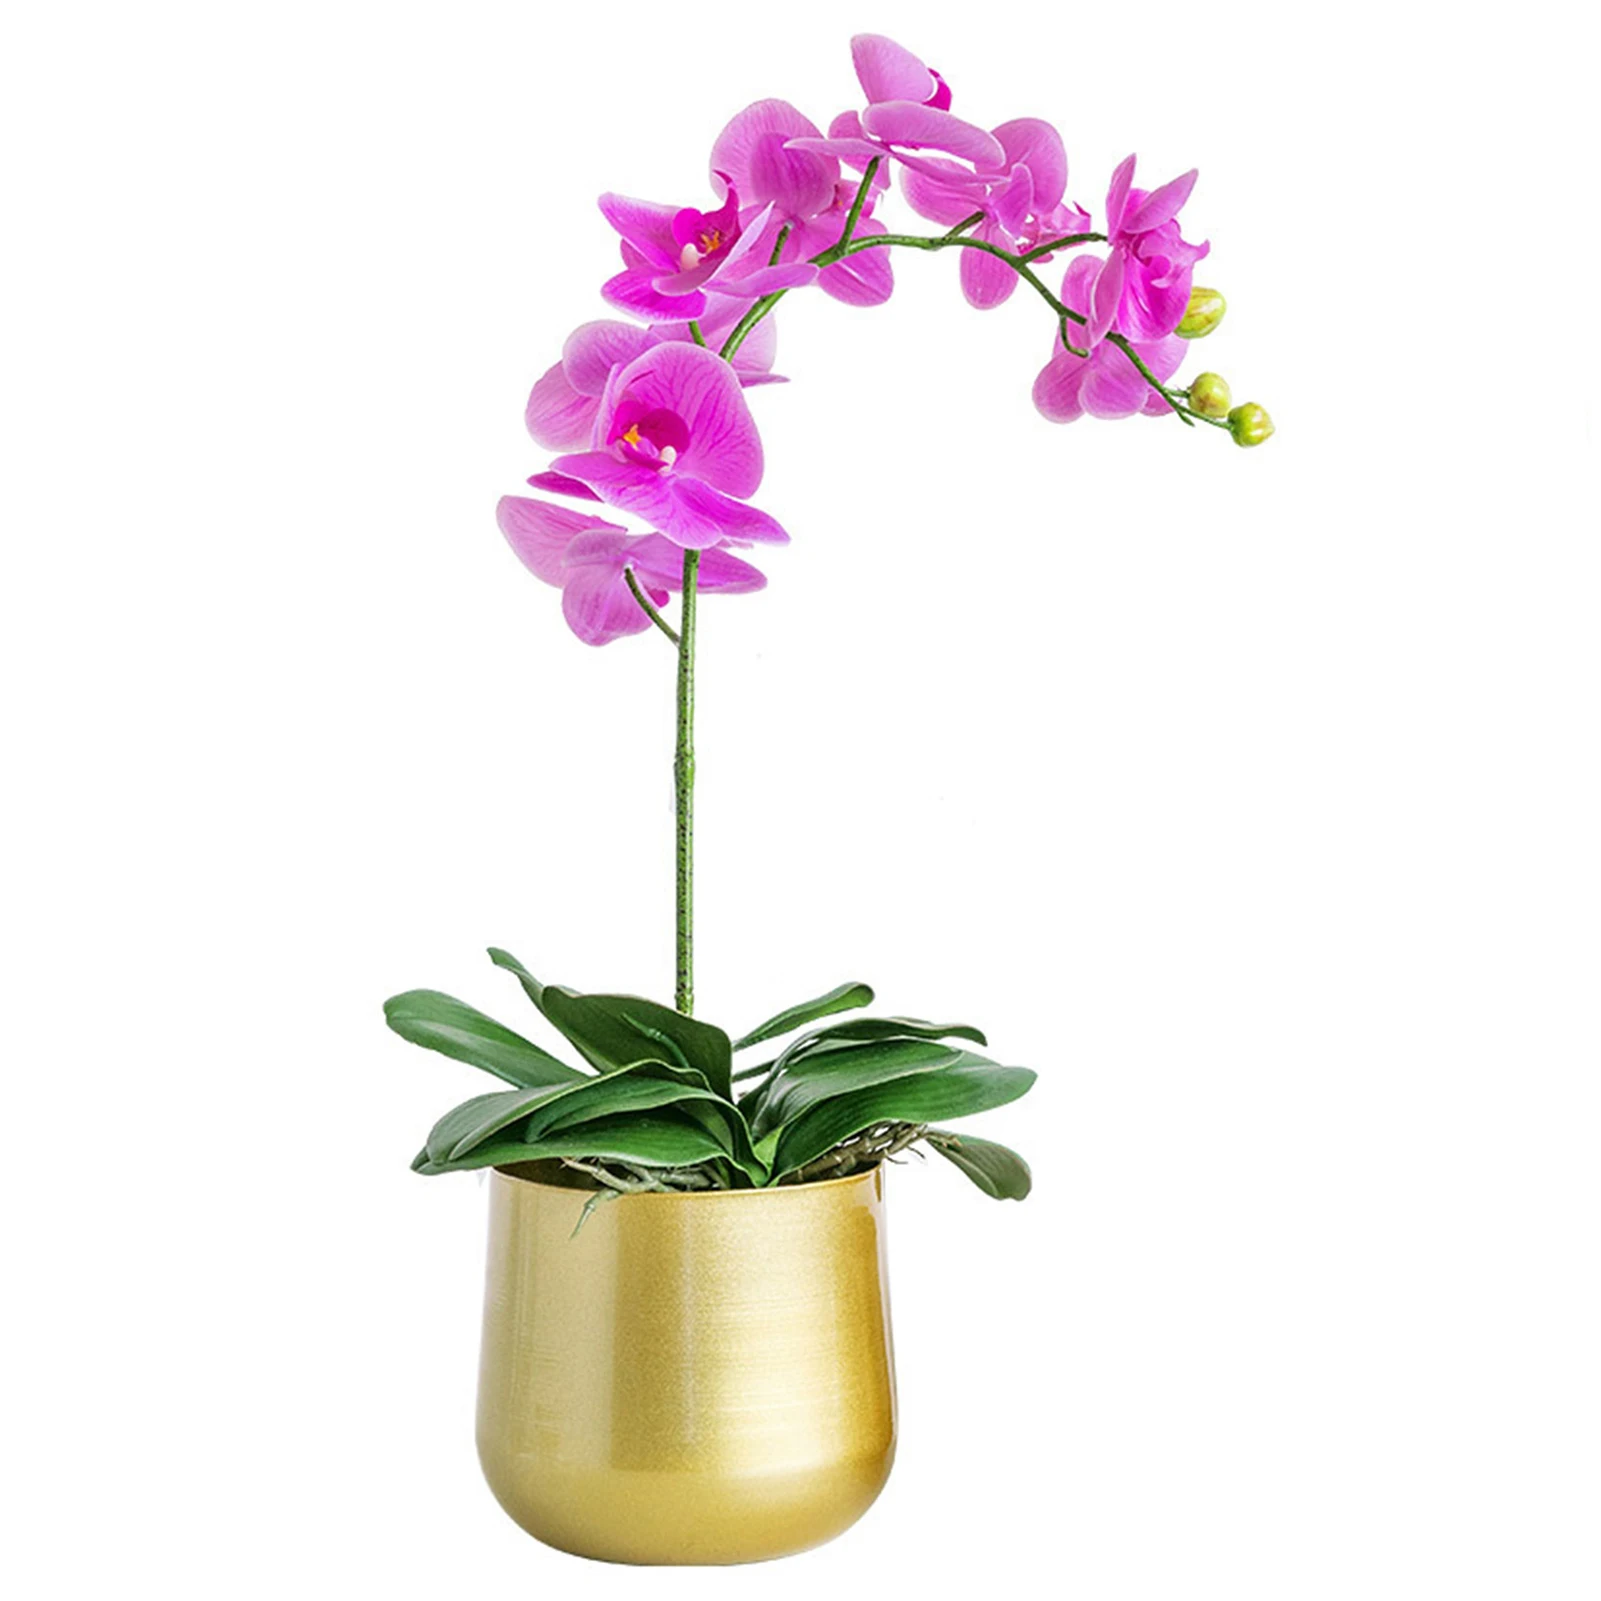 Gold Plant Pot Gold Planter Metal Flower Pot Vase With Drainage Hole Modern Flowerpot For Indoor Outdoor Balcony Decoration